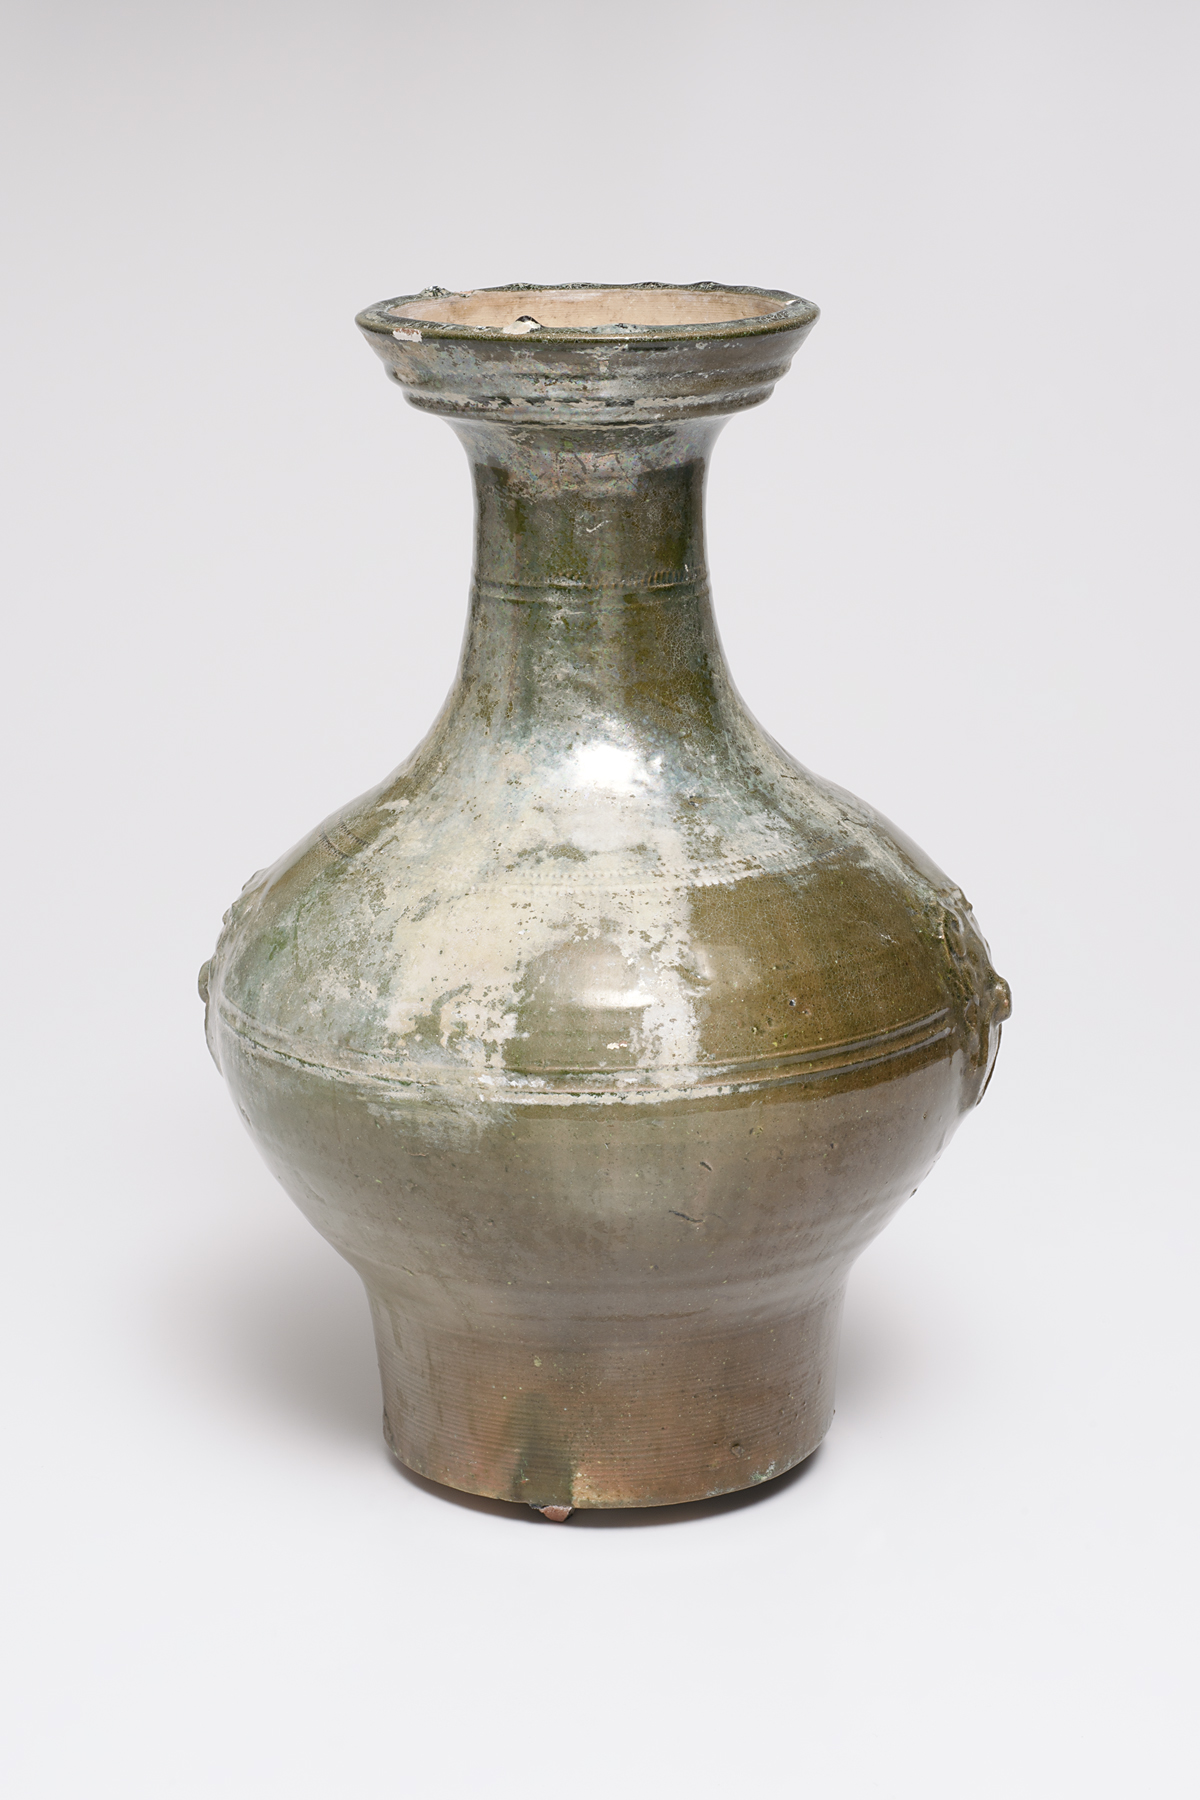 hu-shaped funerary vase (one of a pair)